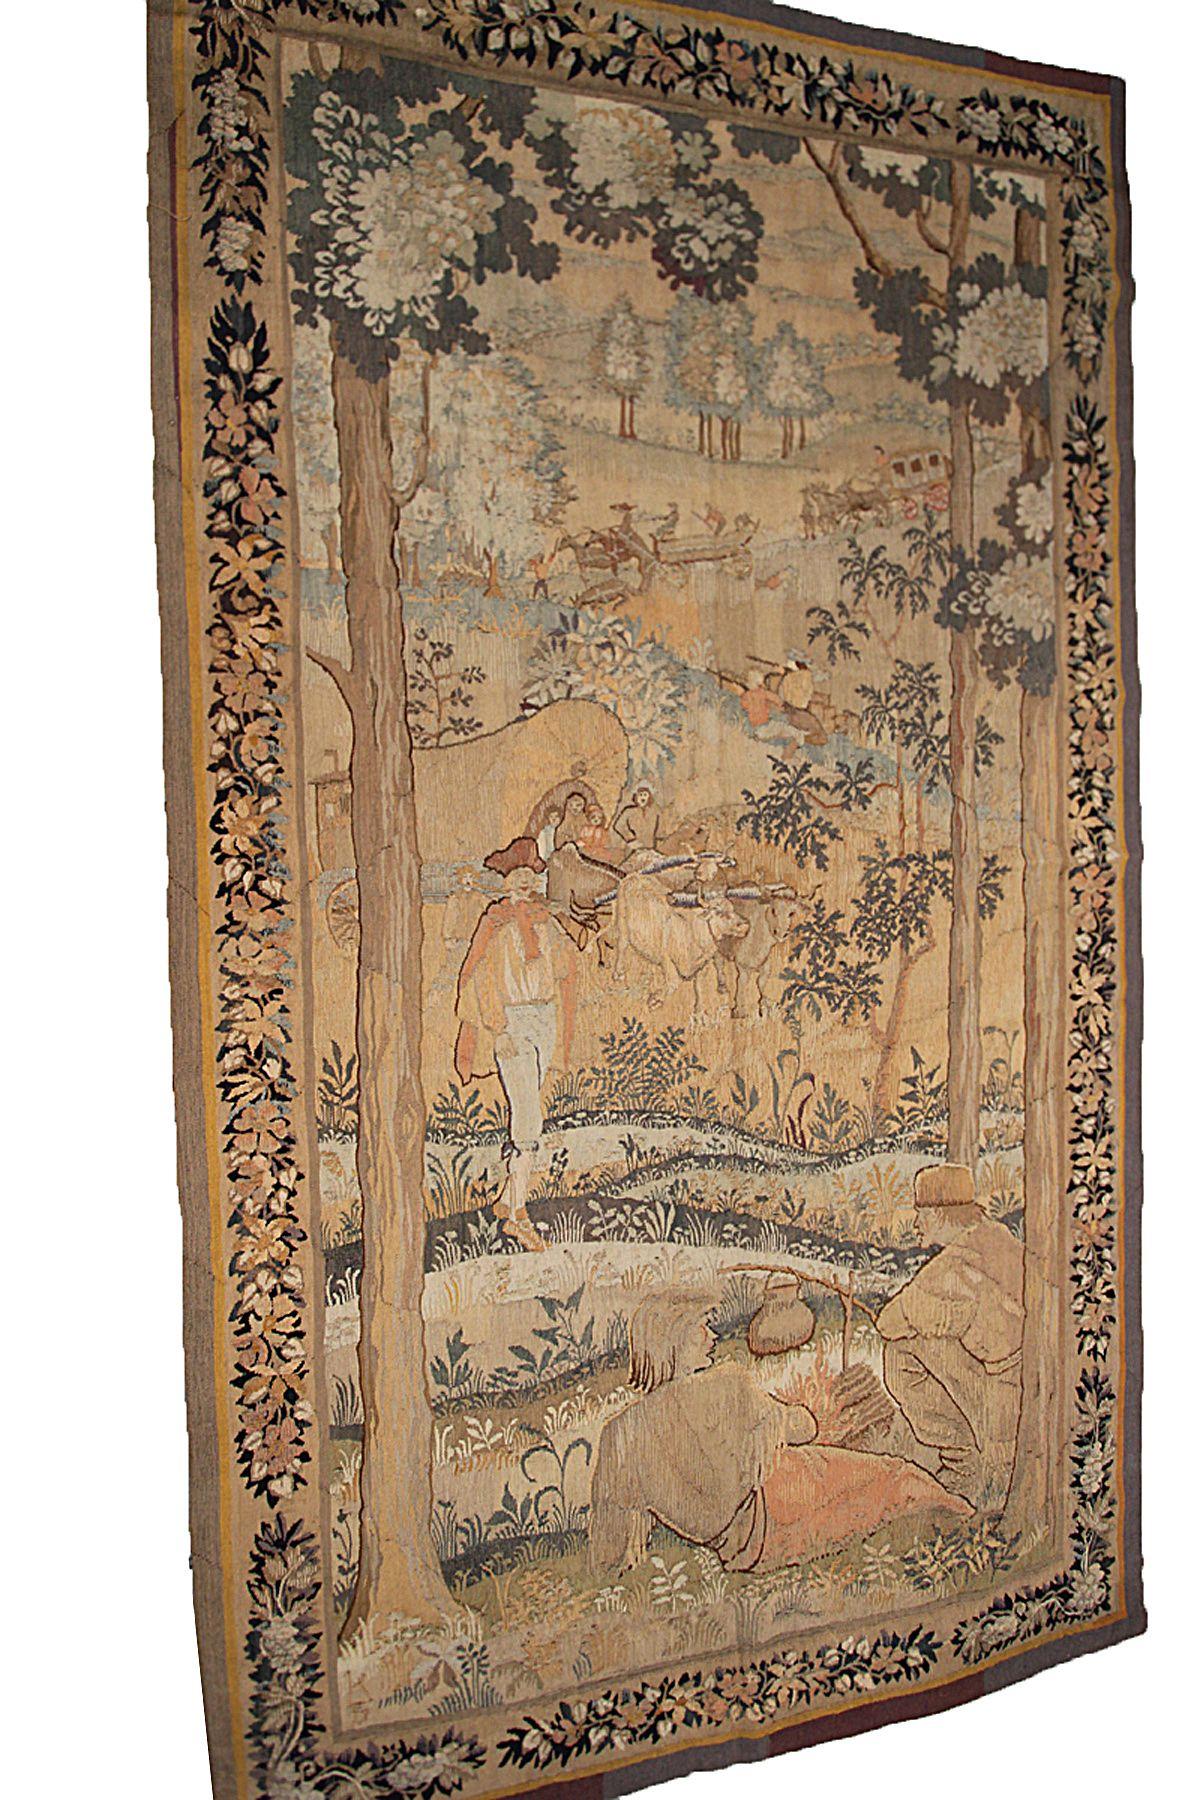 Antique Tapestry French Figural Tapestry Verdure Battle

5' x 8'10